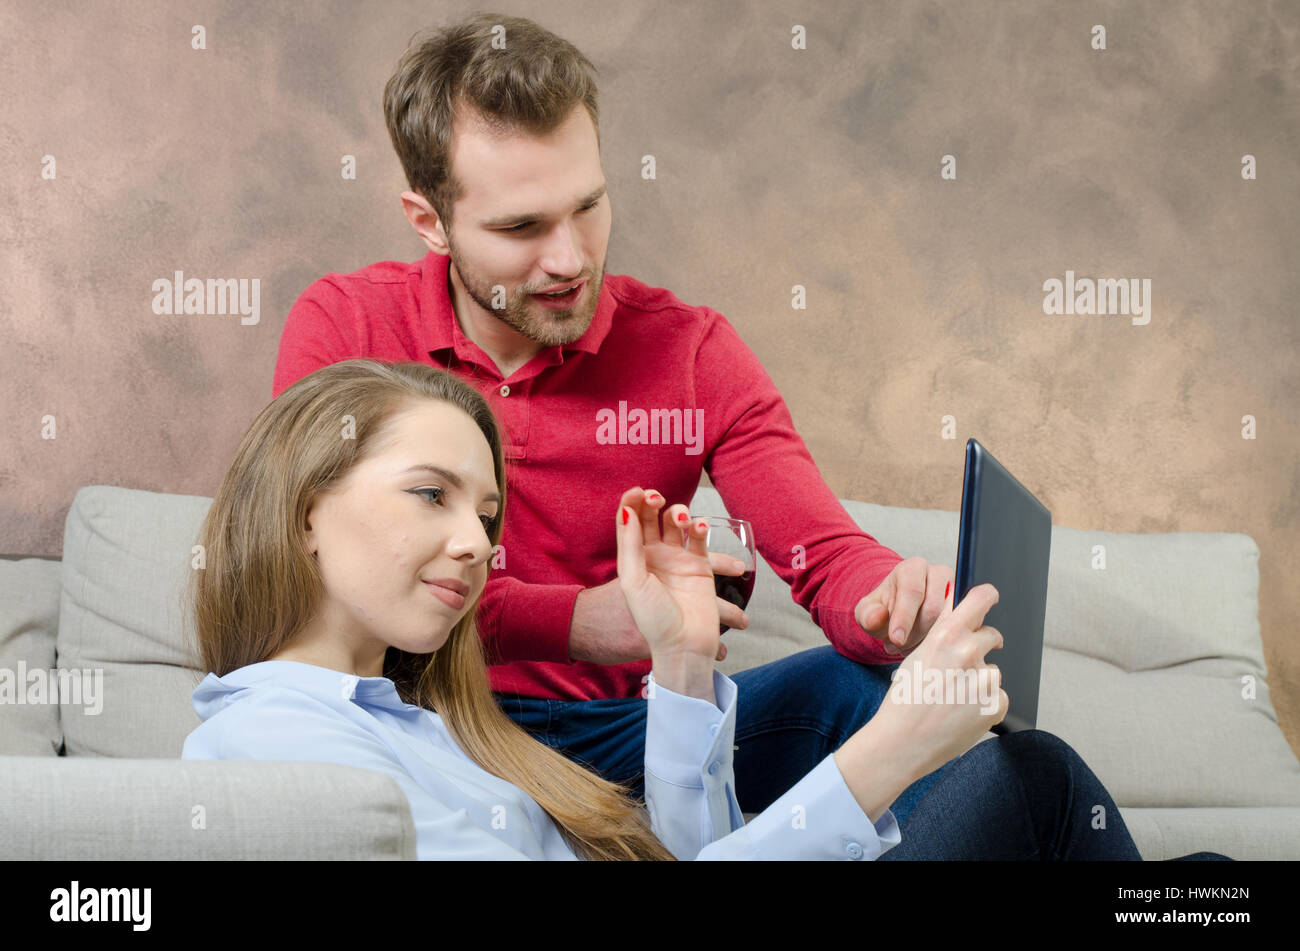 Pair spends free time. Woman with a tablet in hands. woman tablet holding behind lifestyle leisure indoor couple concept Stock Photo